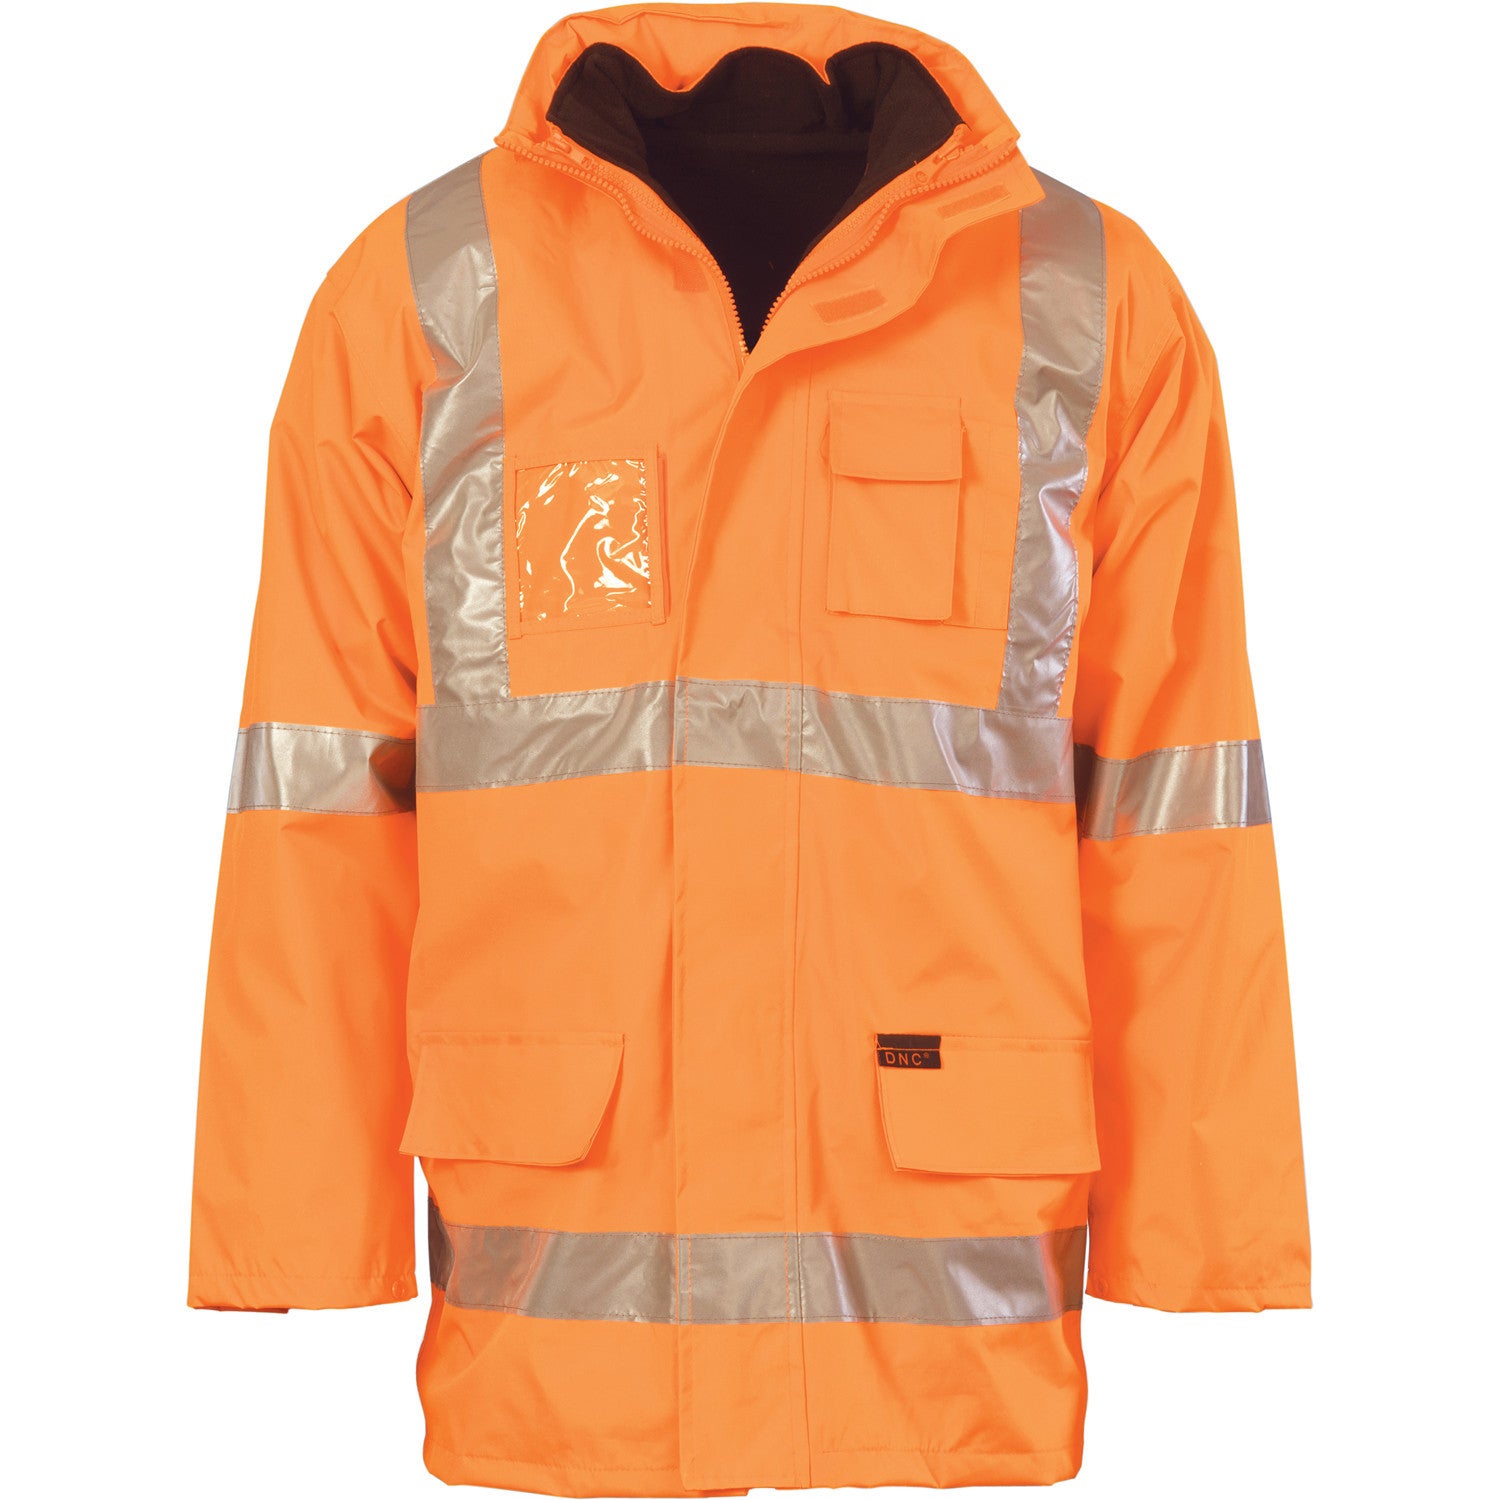 DNC Hivis Cross Back D/N “6 In 1” Jacket (Outer Jacket And Inner Vest Can Be Sold Separately) (3999)